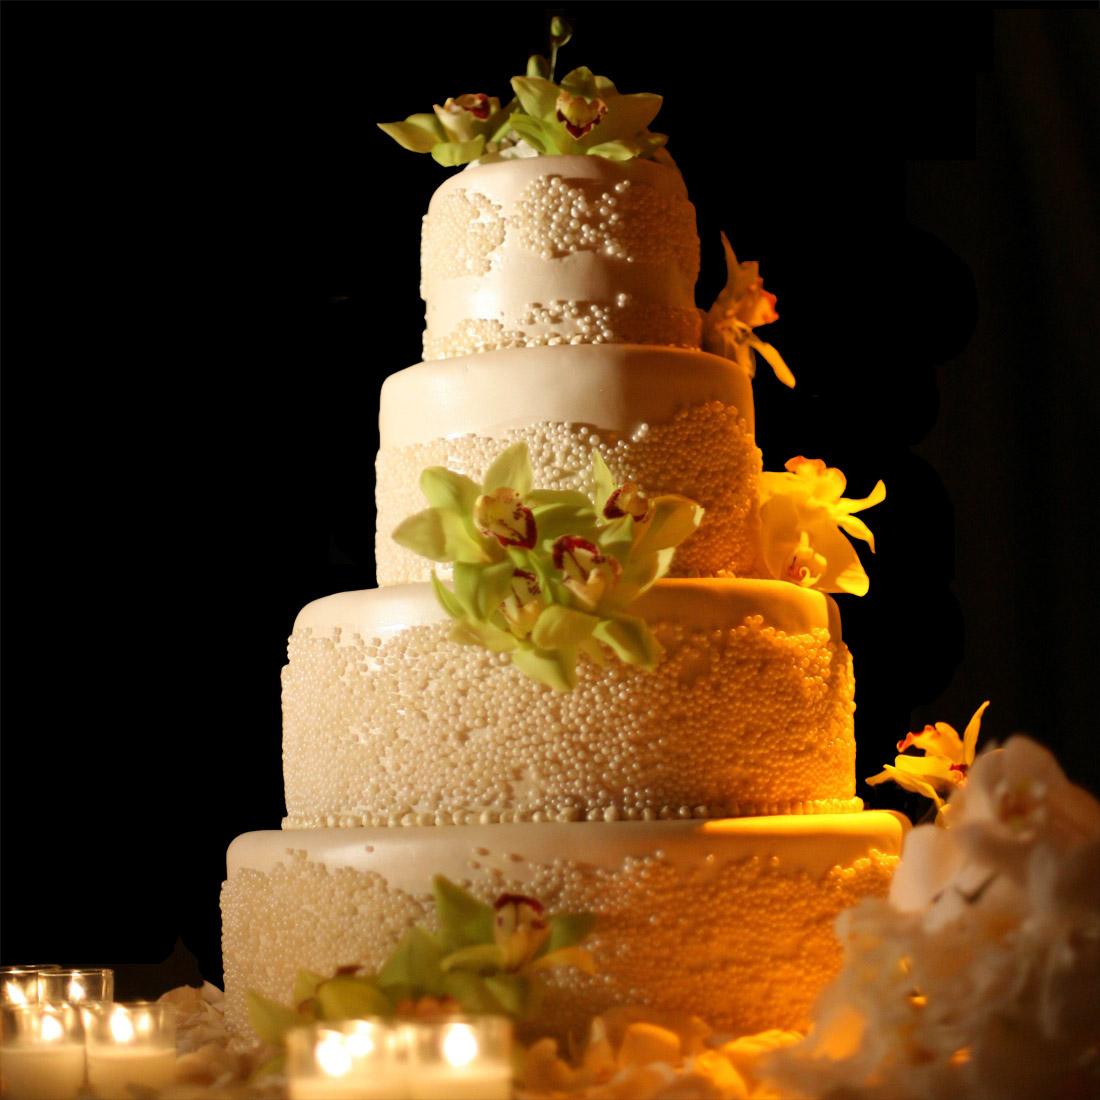 Lovely wedding cakes pictures